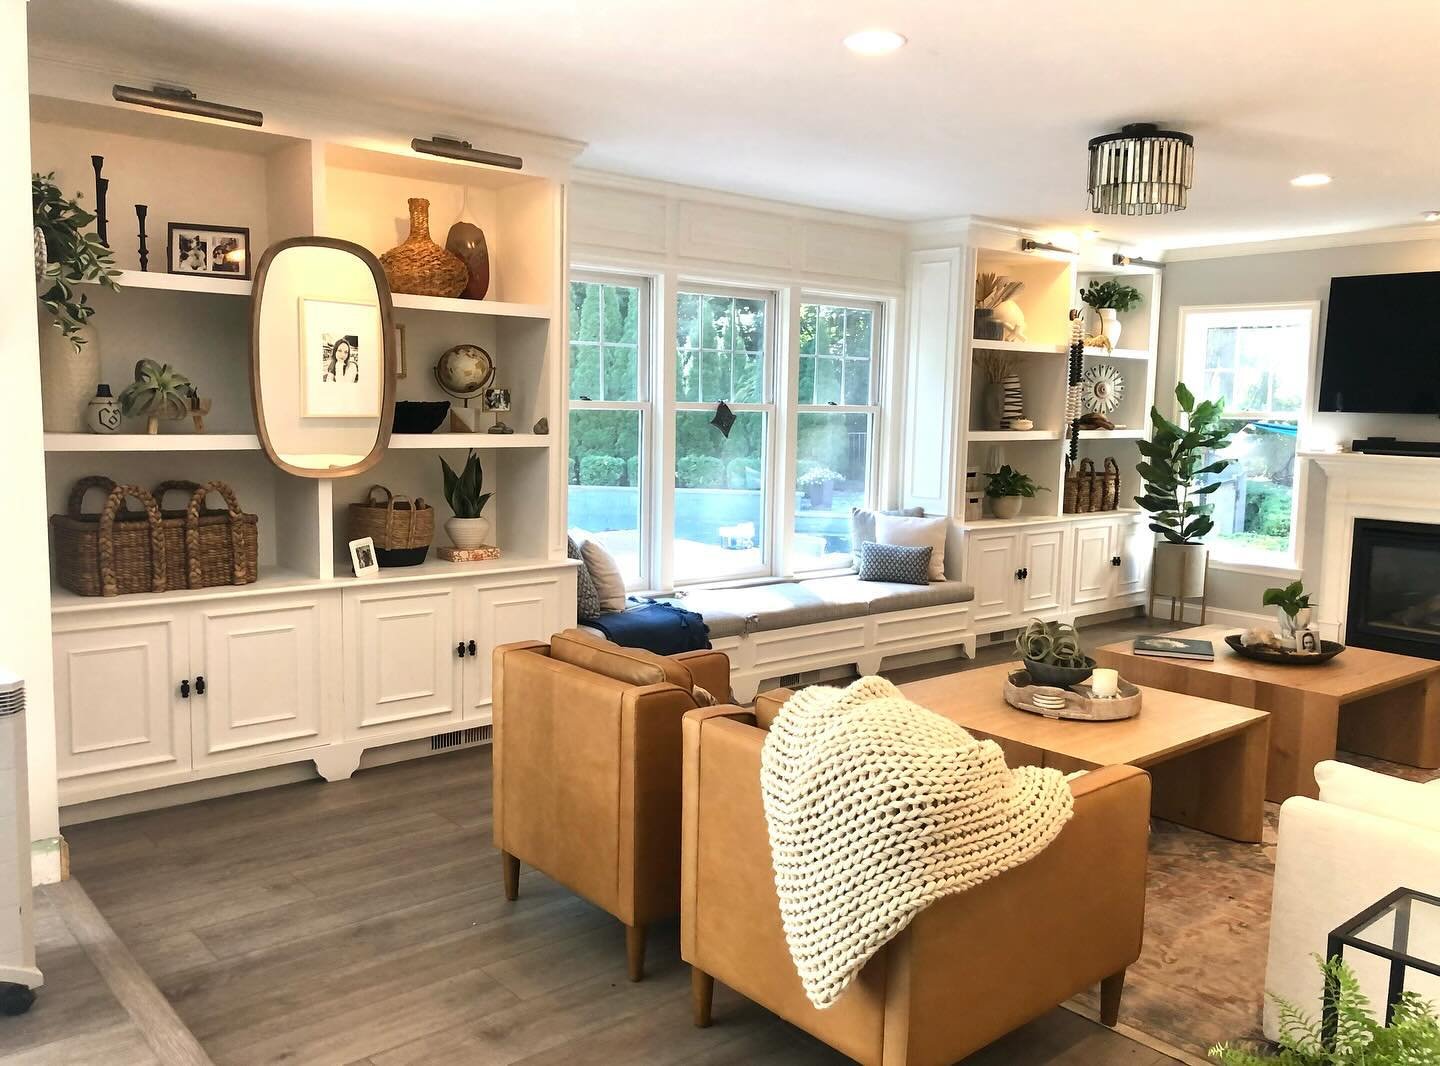 Family room spaces for family of 6 and two giant dogs&hellip; durable fabric is the name of the game over here. But what a bright, interesting space! The power of the design board of #edesign board showing what&rsquo;s to come! 

#westelmstyle #weste